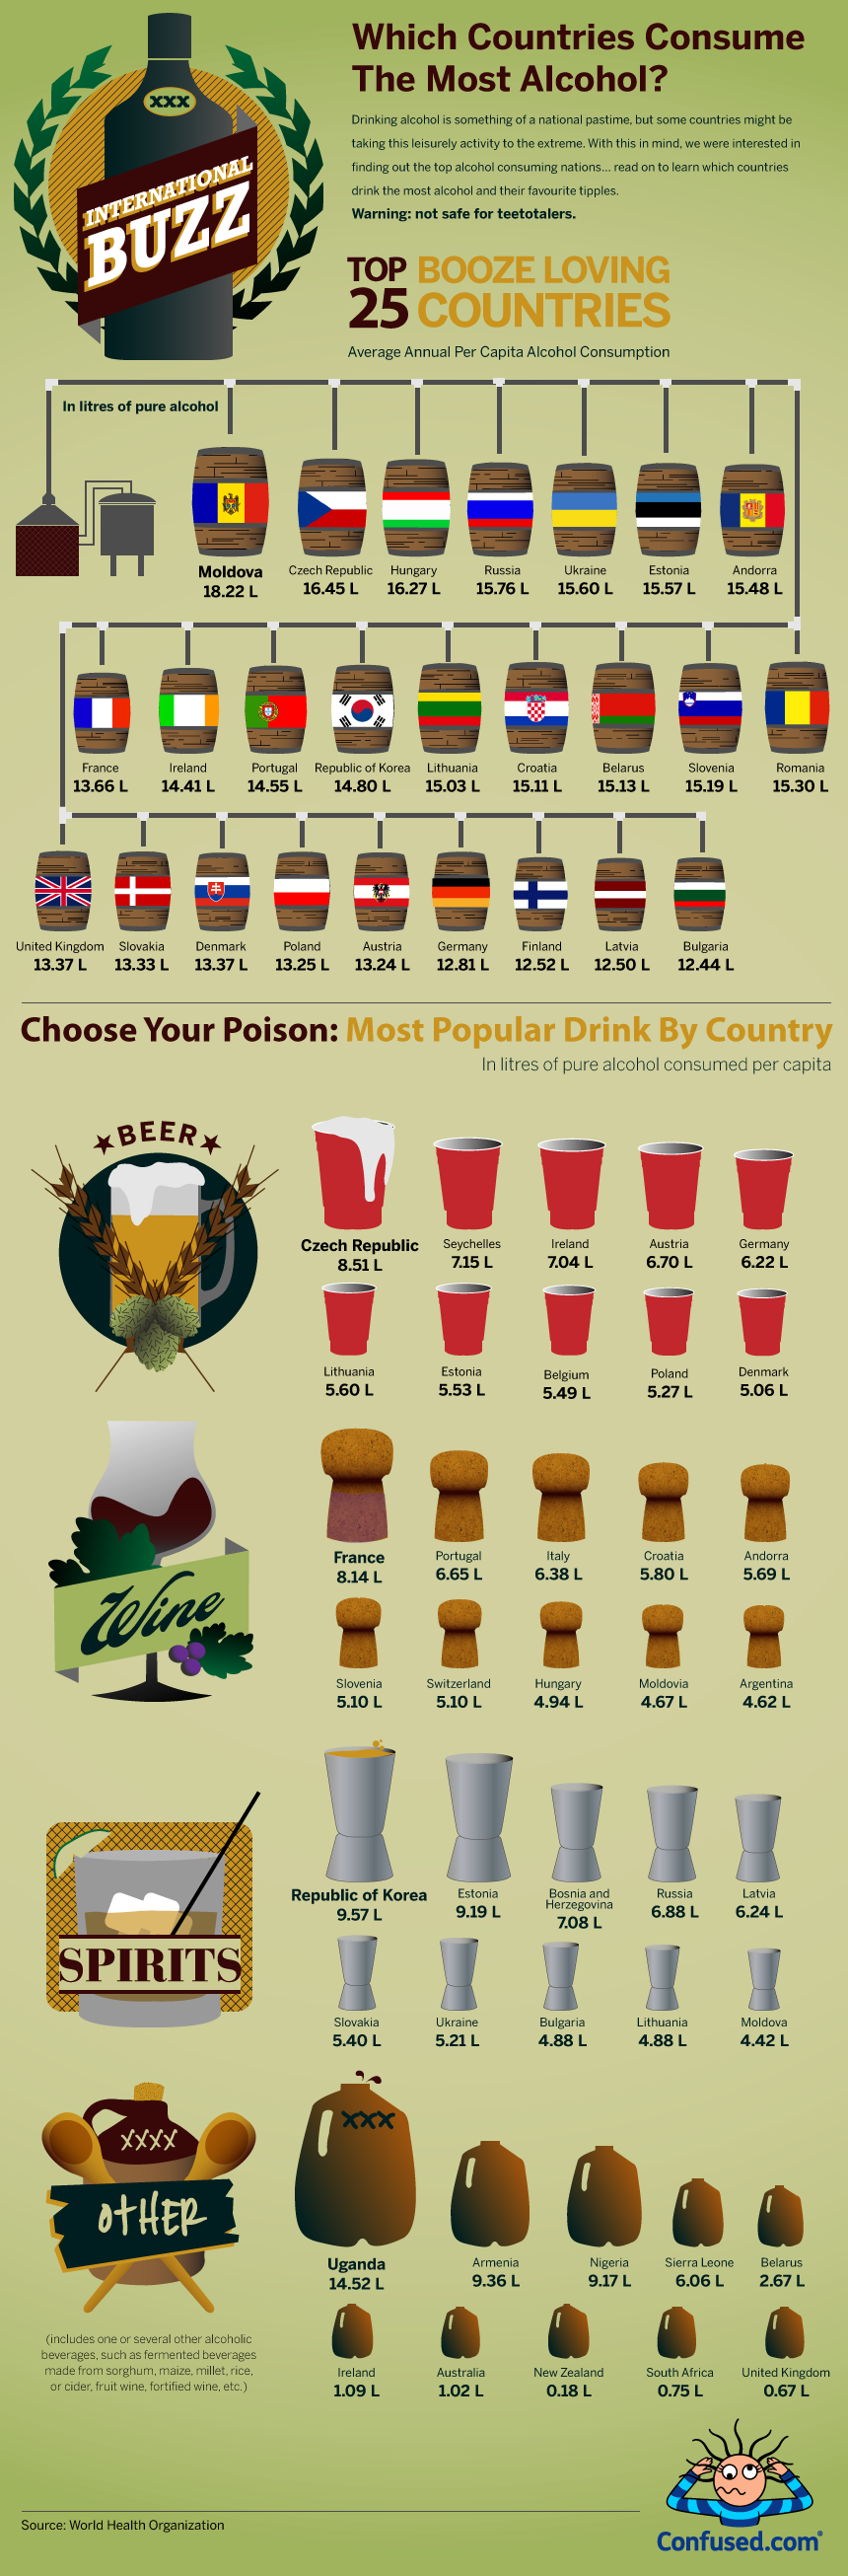 Infographic of countries consuming alcohol,